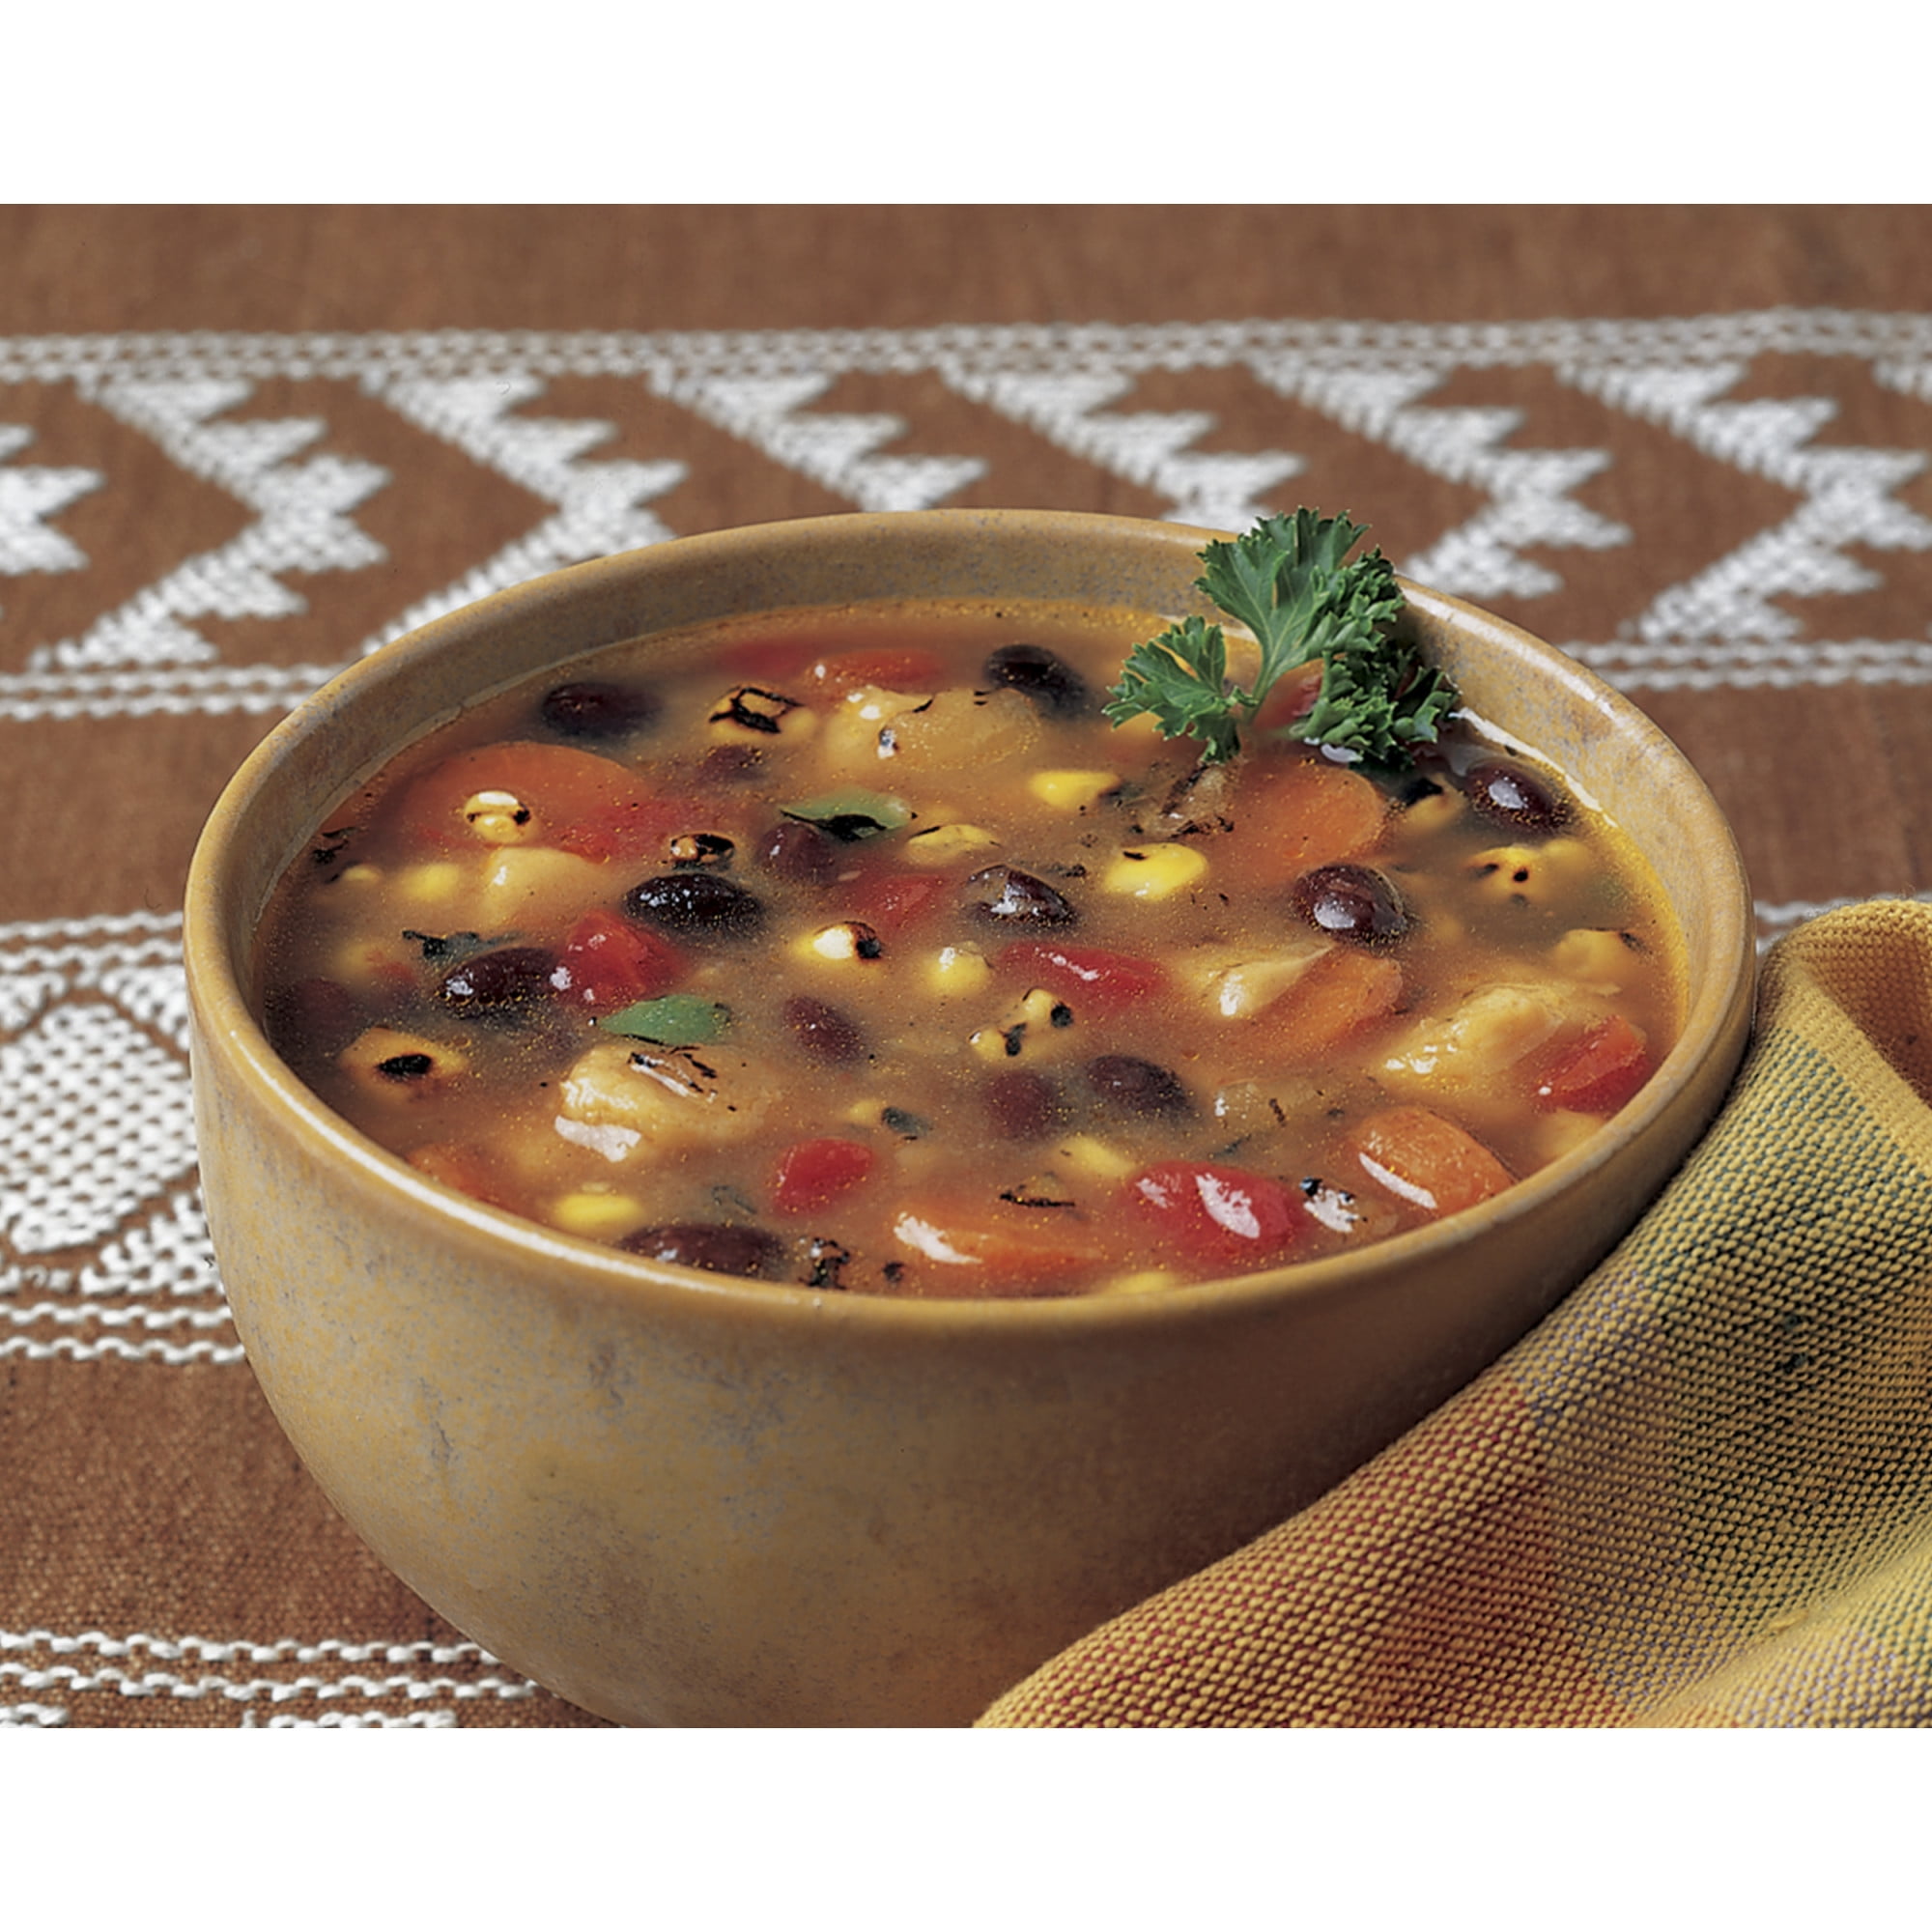 Amy's Soups, Organic, Southwestern Vegetables, Fire Roasted - 14.3 oz